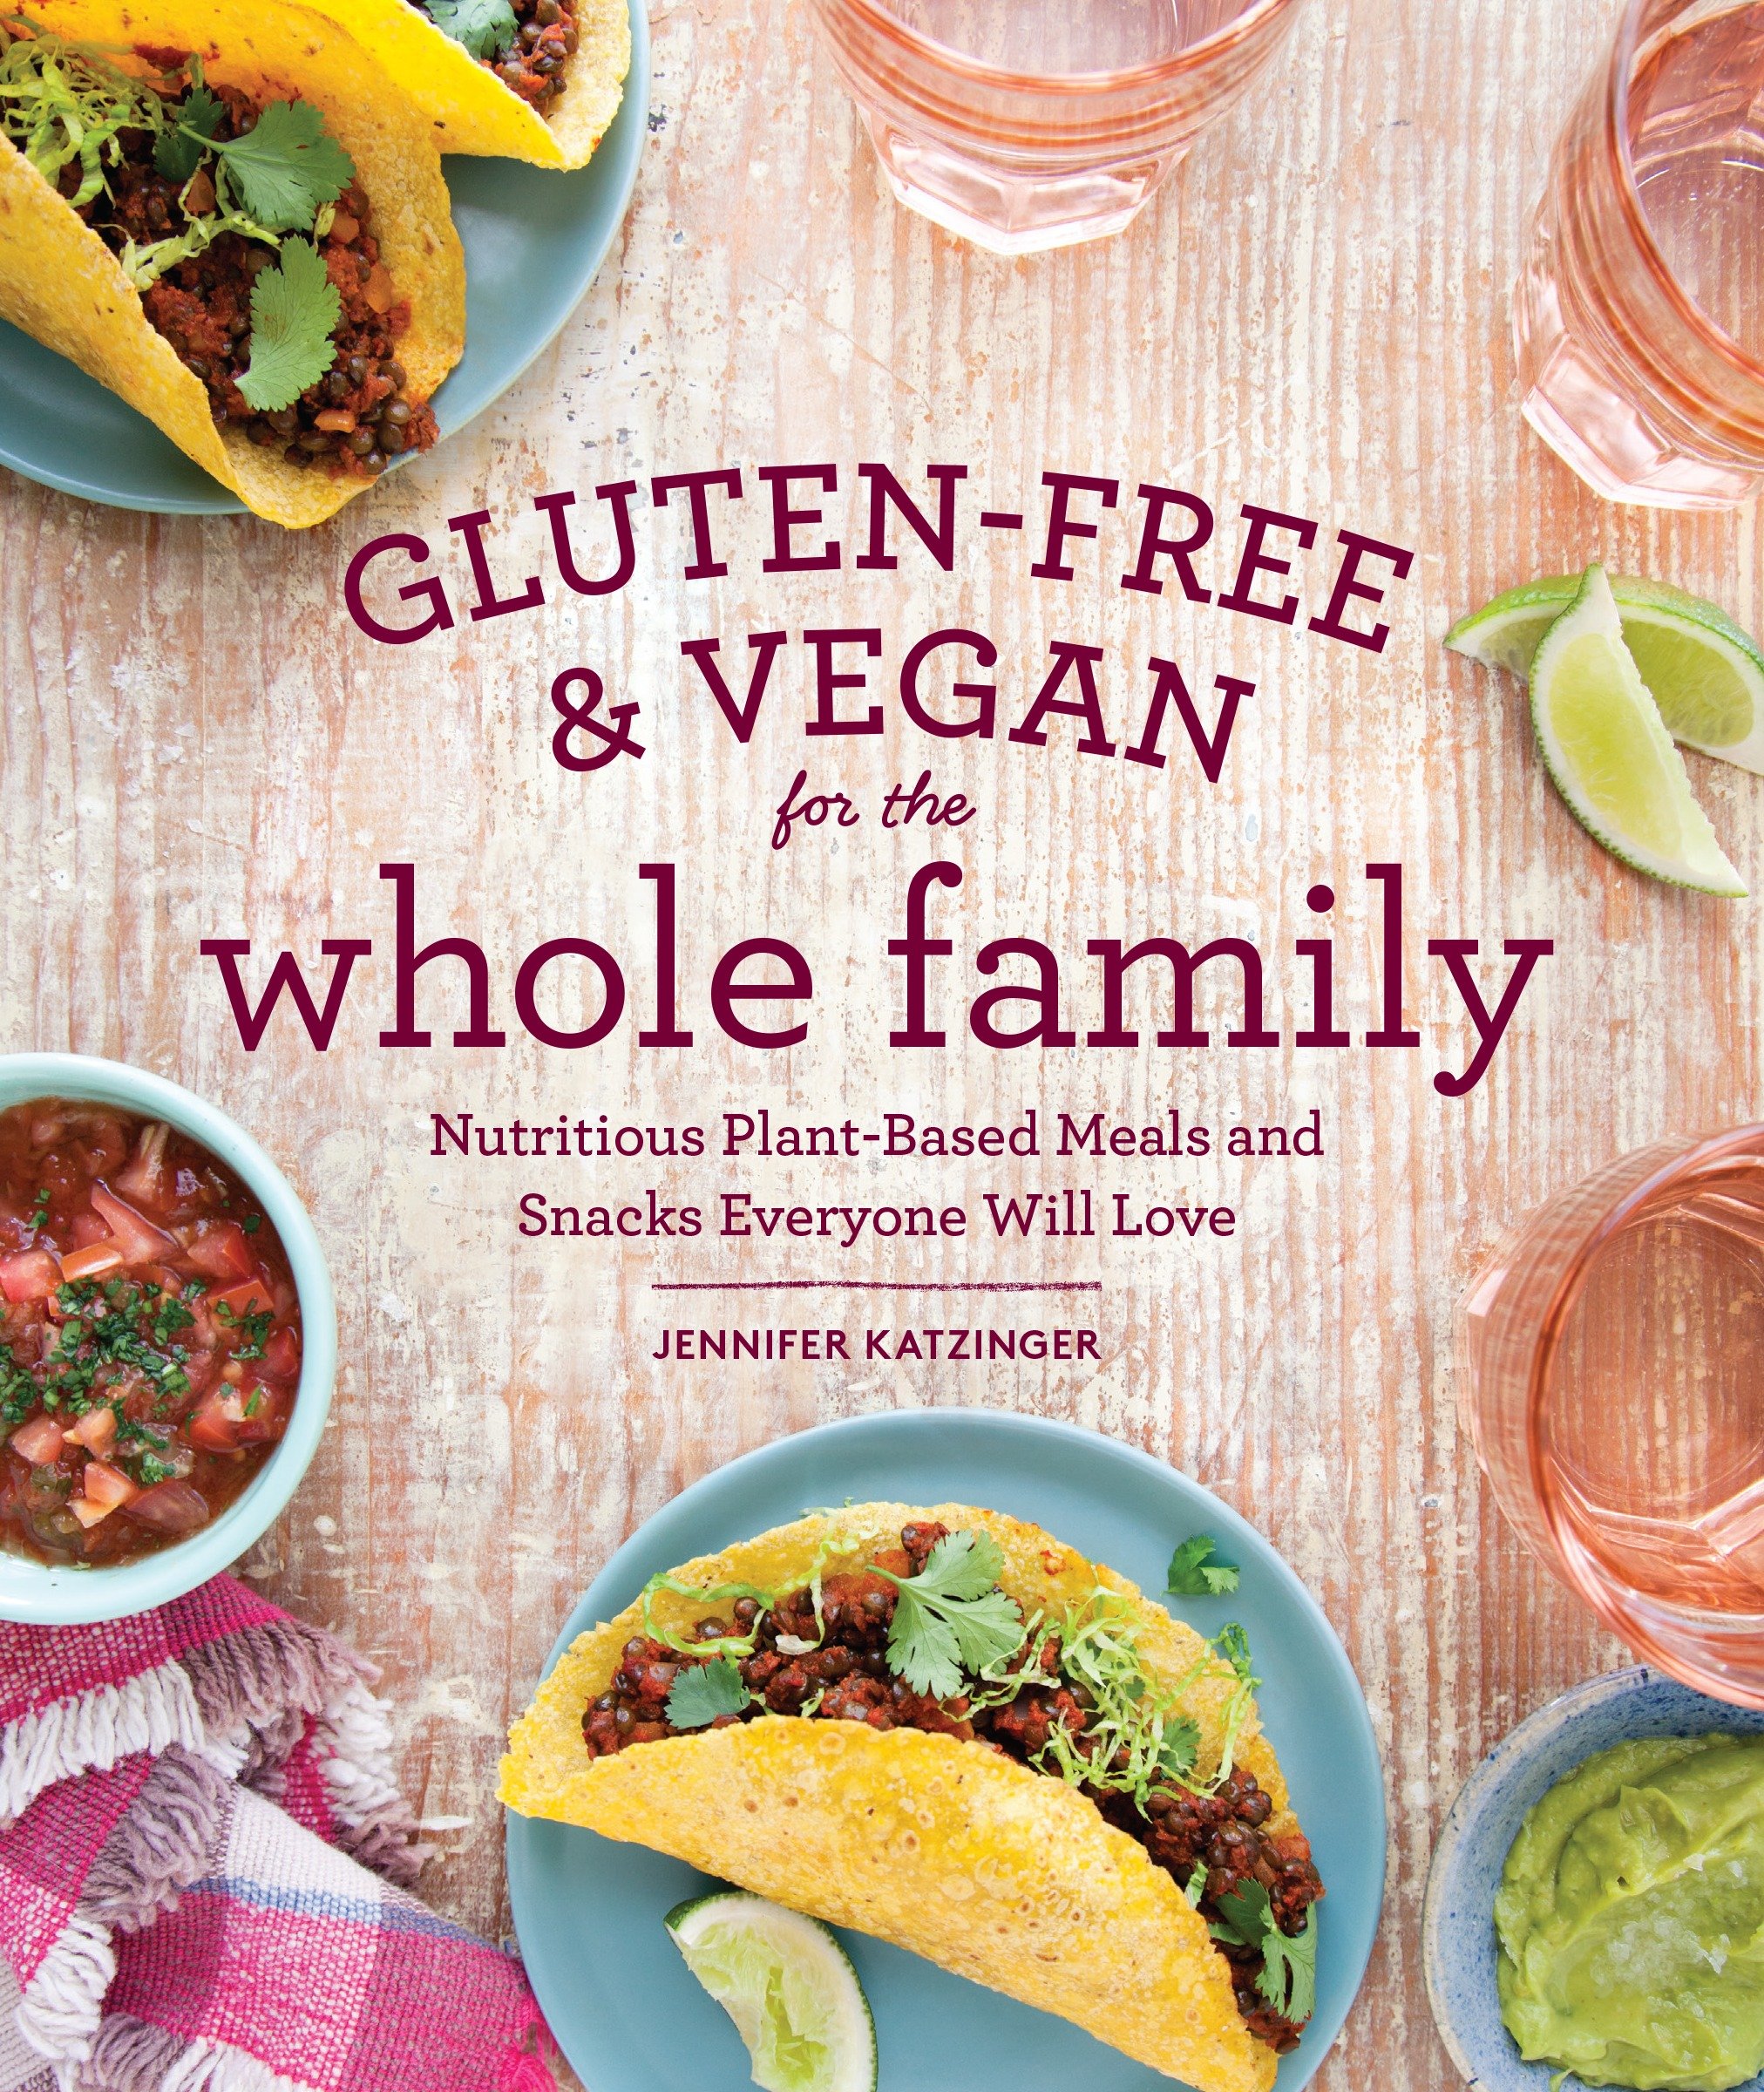 Gluten-free & vegan for the whole family nutritious plant-based meals and snacks everyone will love cover image